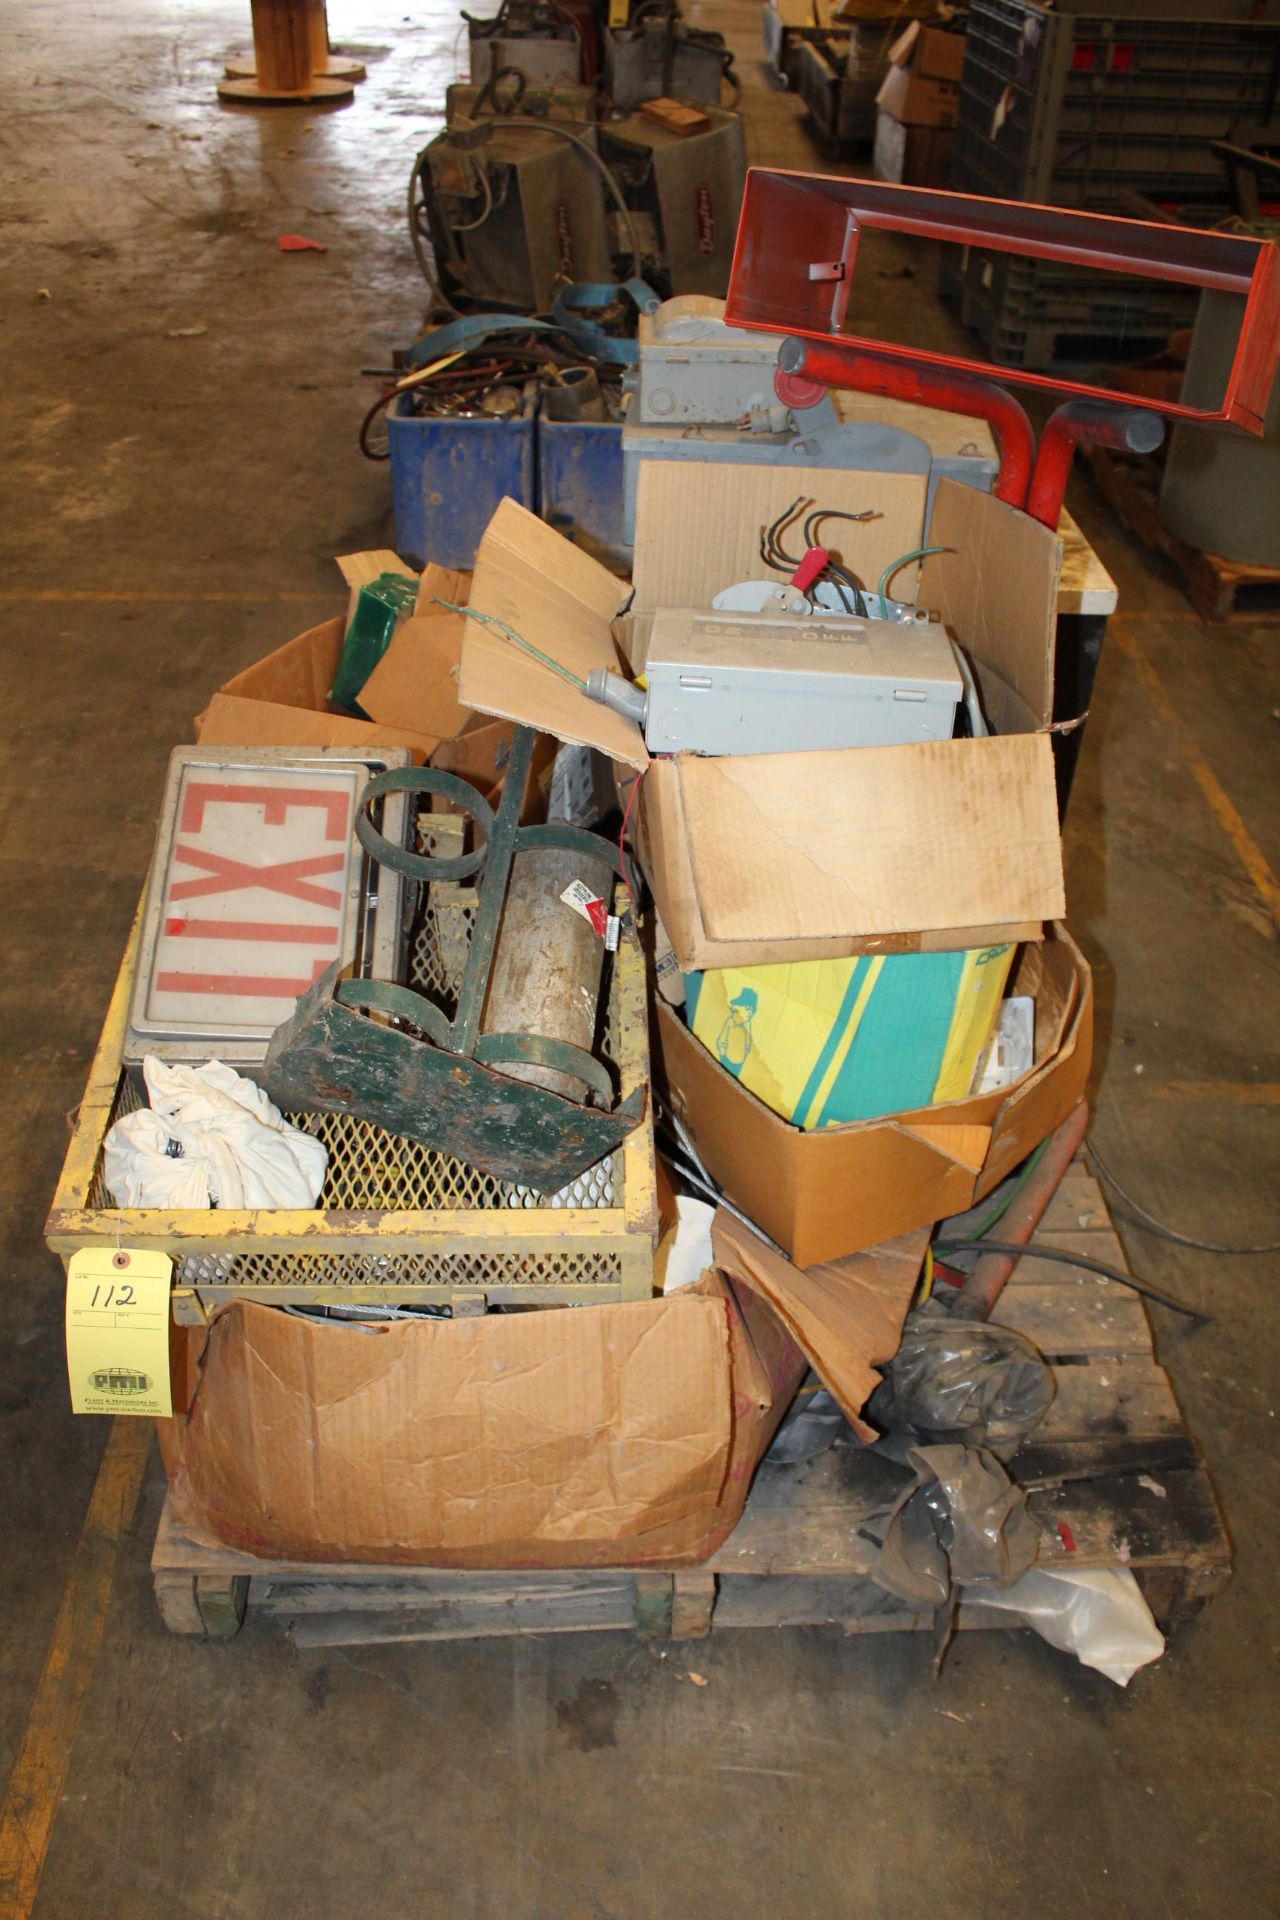 LOT CONSISTING OF: electrical switch gear, misc. shop supplies, electrical cords, etc. (Located